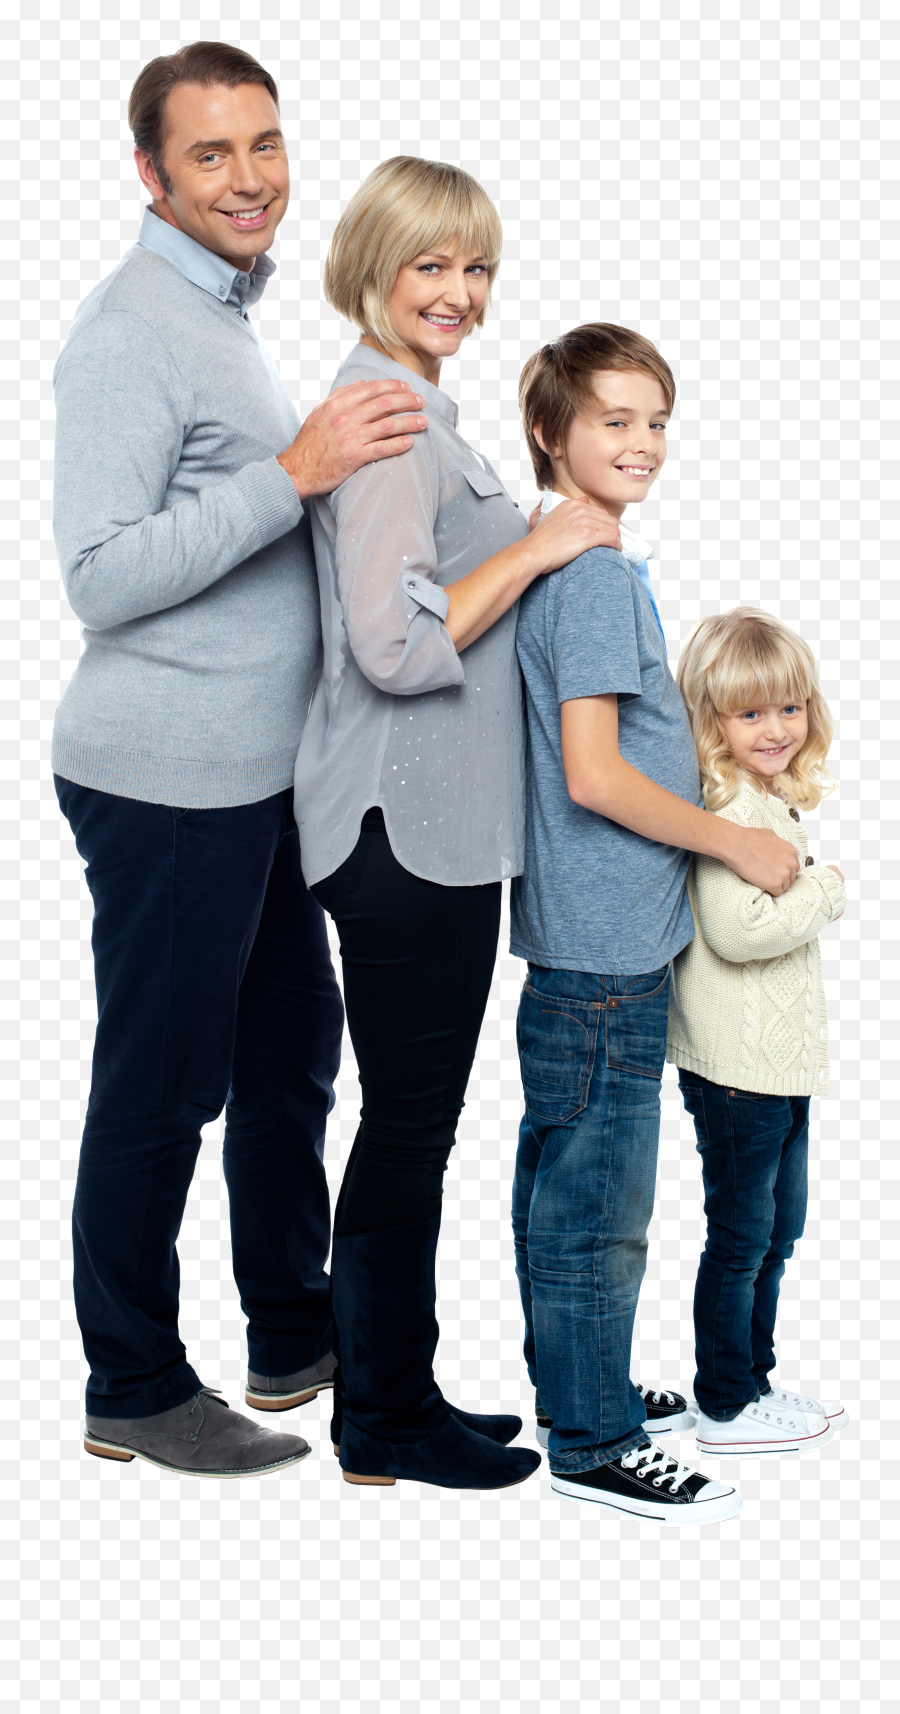 Family Png Stock Images Play - Family Photos 4 Members,Png Stock